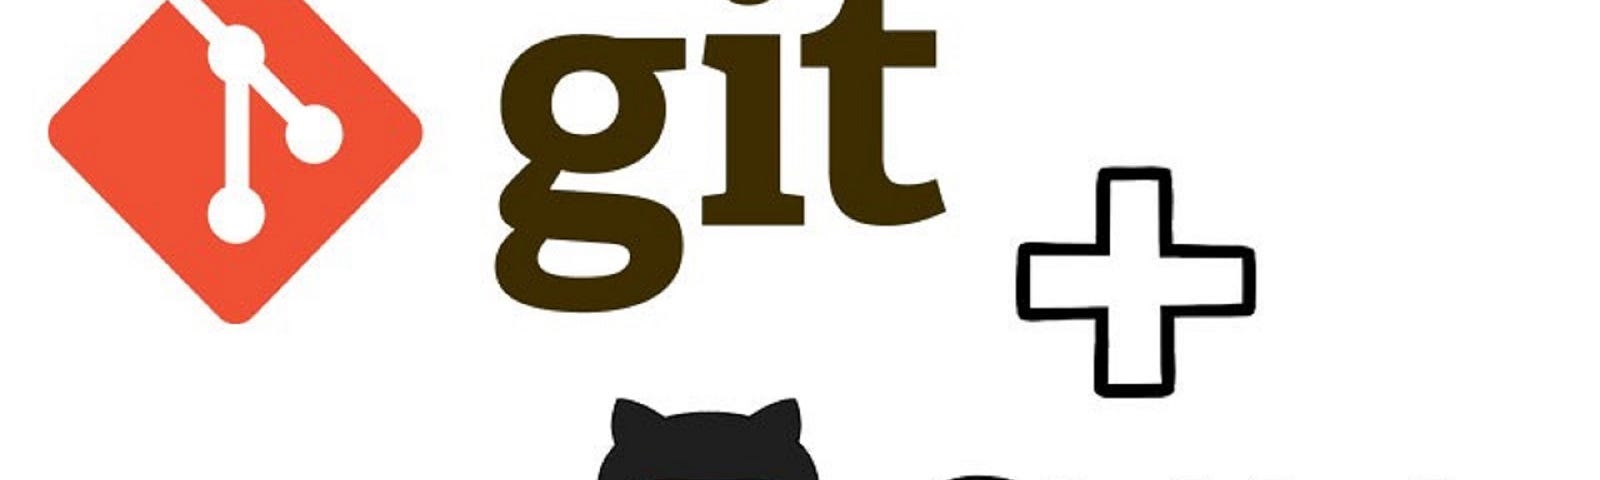 An image which has two symbols, one of git and another one go GitHub